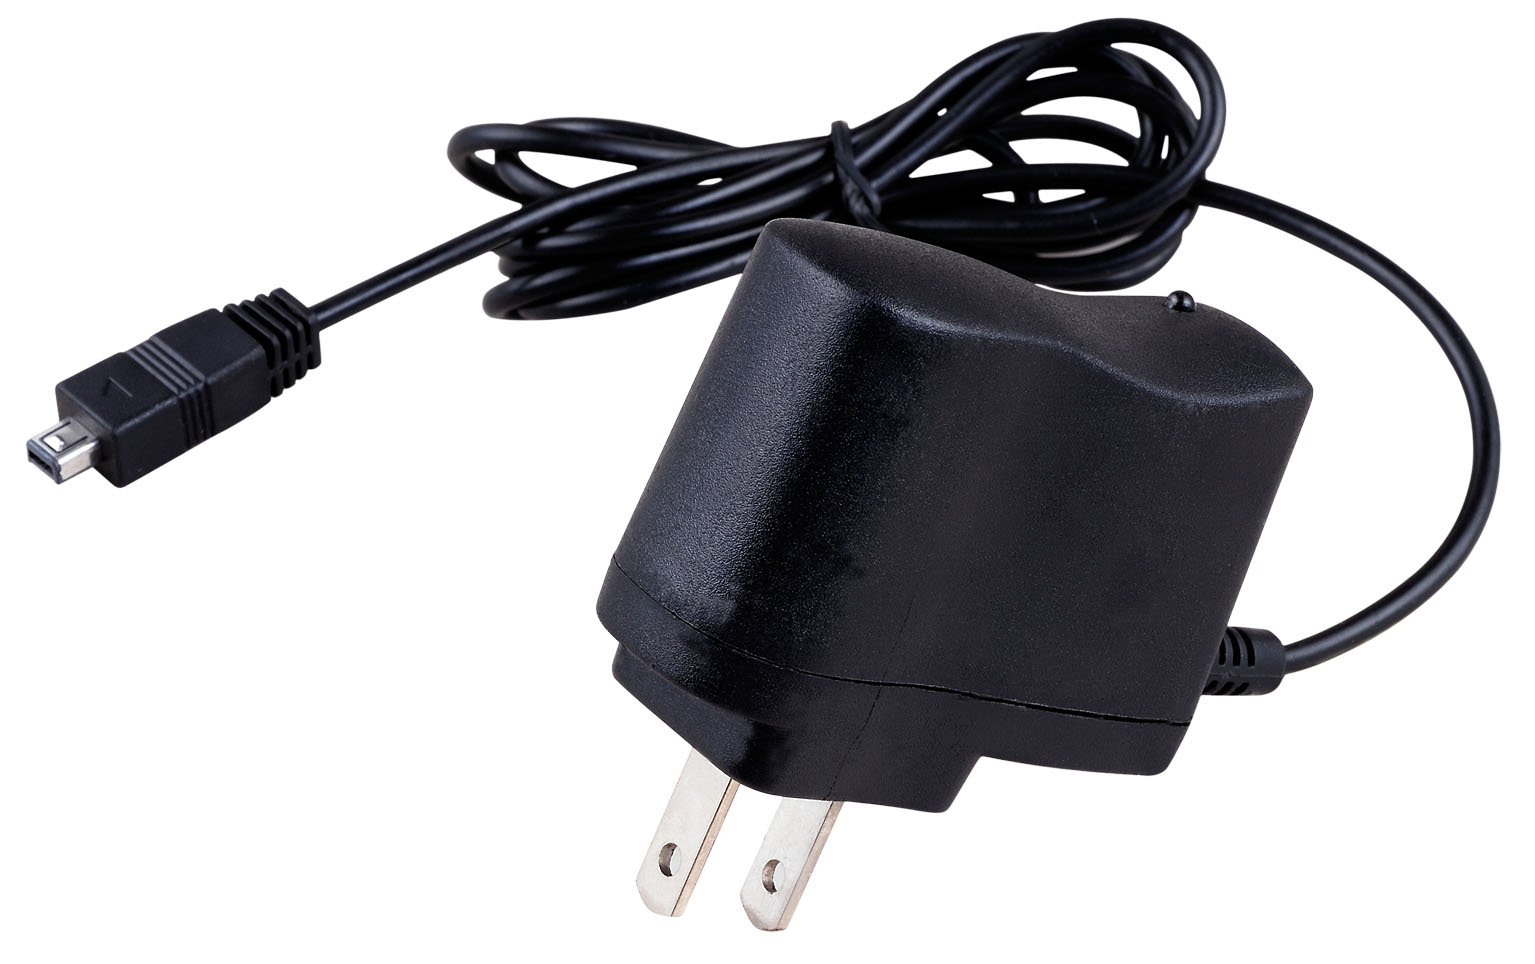 Application: USB Mobile Charger